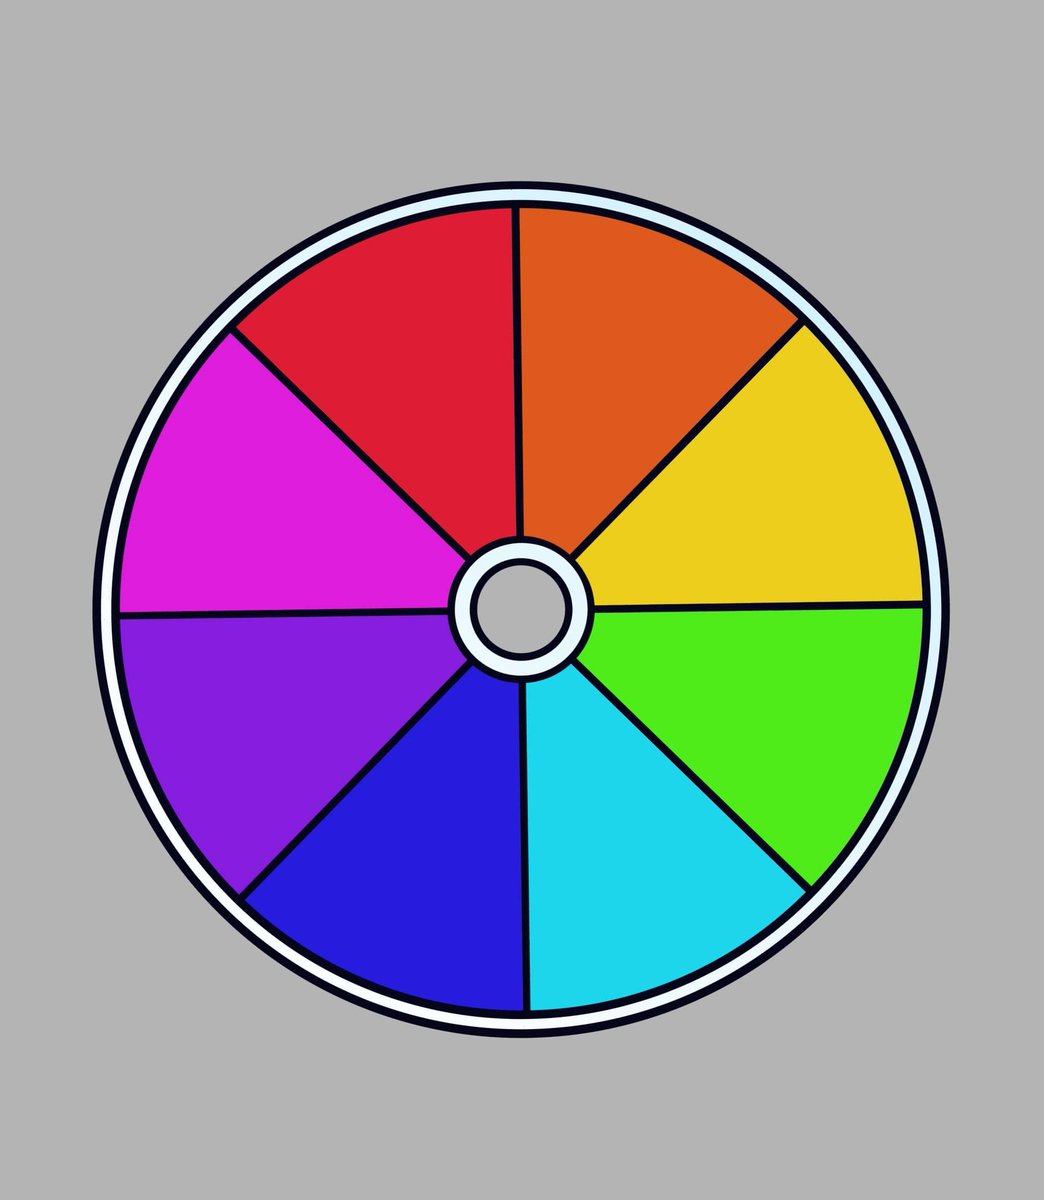 Gonna be doin’ this challenge soon, so give me a character (or two) for any color on the wheel #colorwheelchallenge